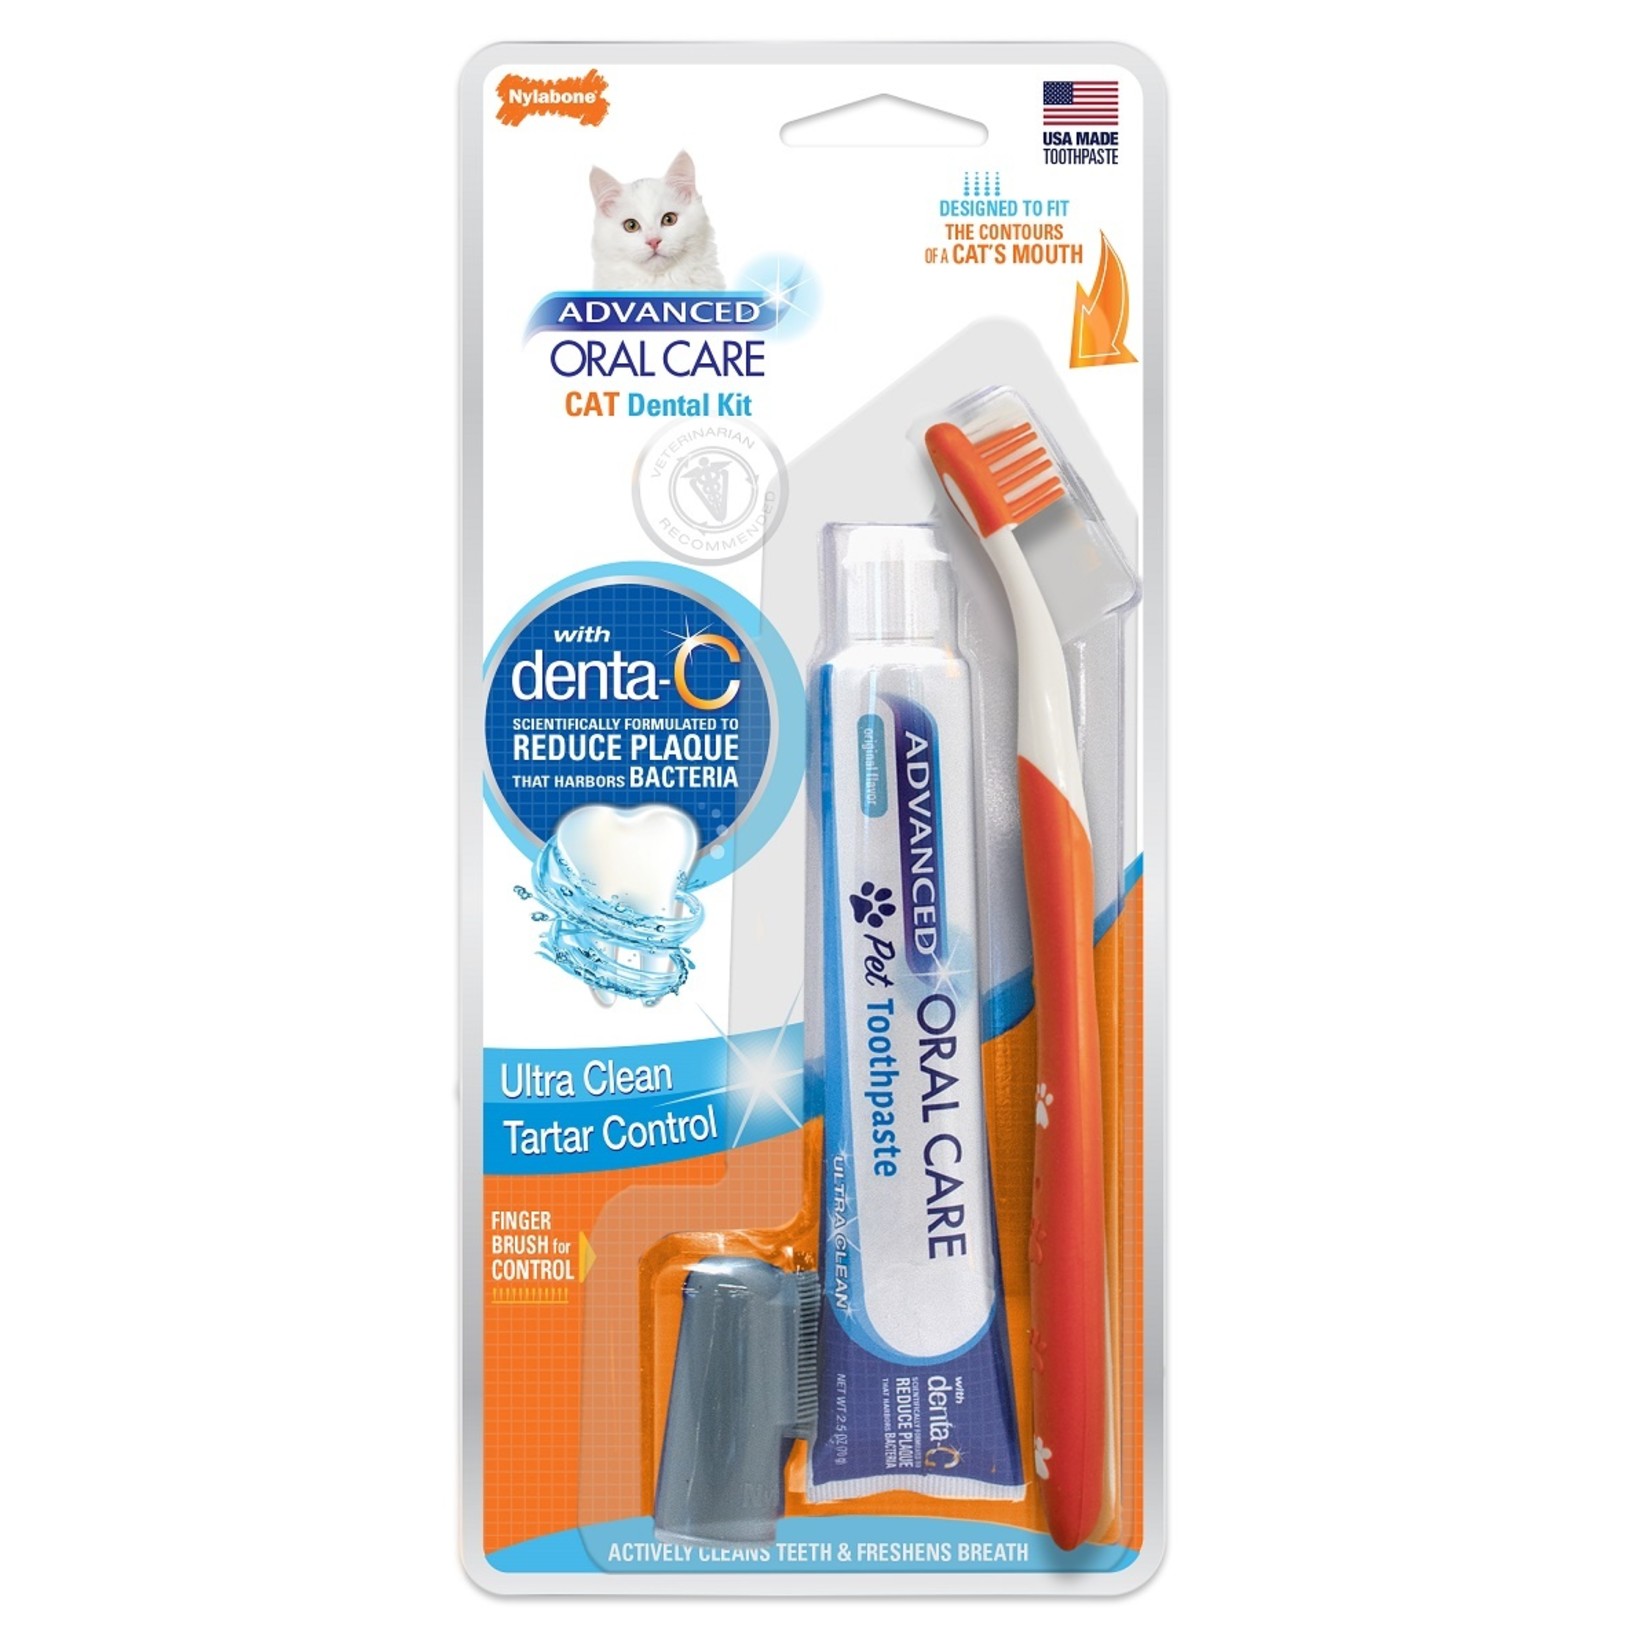 Nylabone Advanced Oral Care Cat Dental Kit with Toothbrushes & Toothpaste